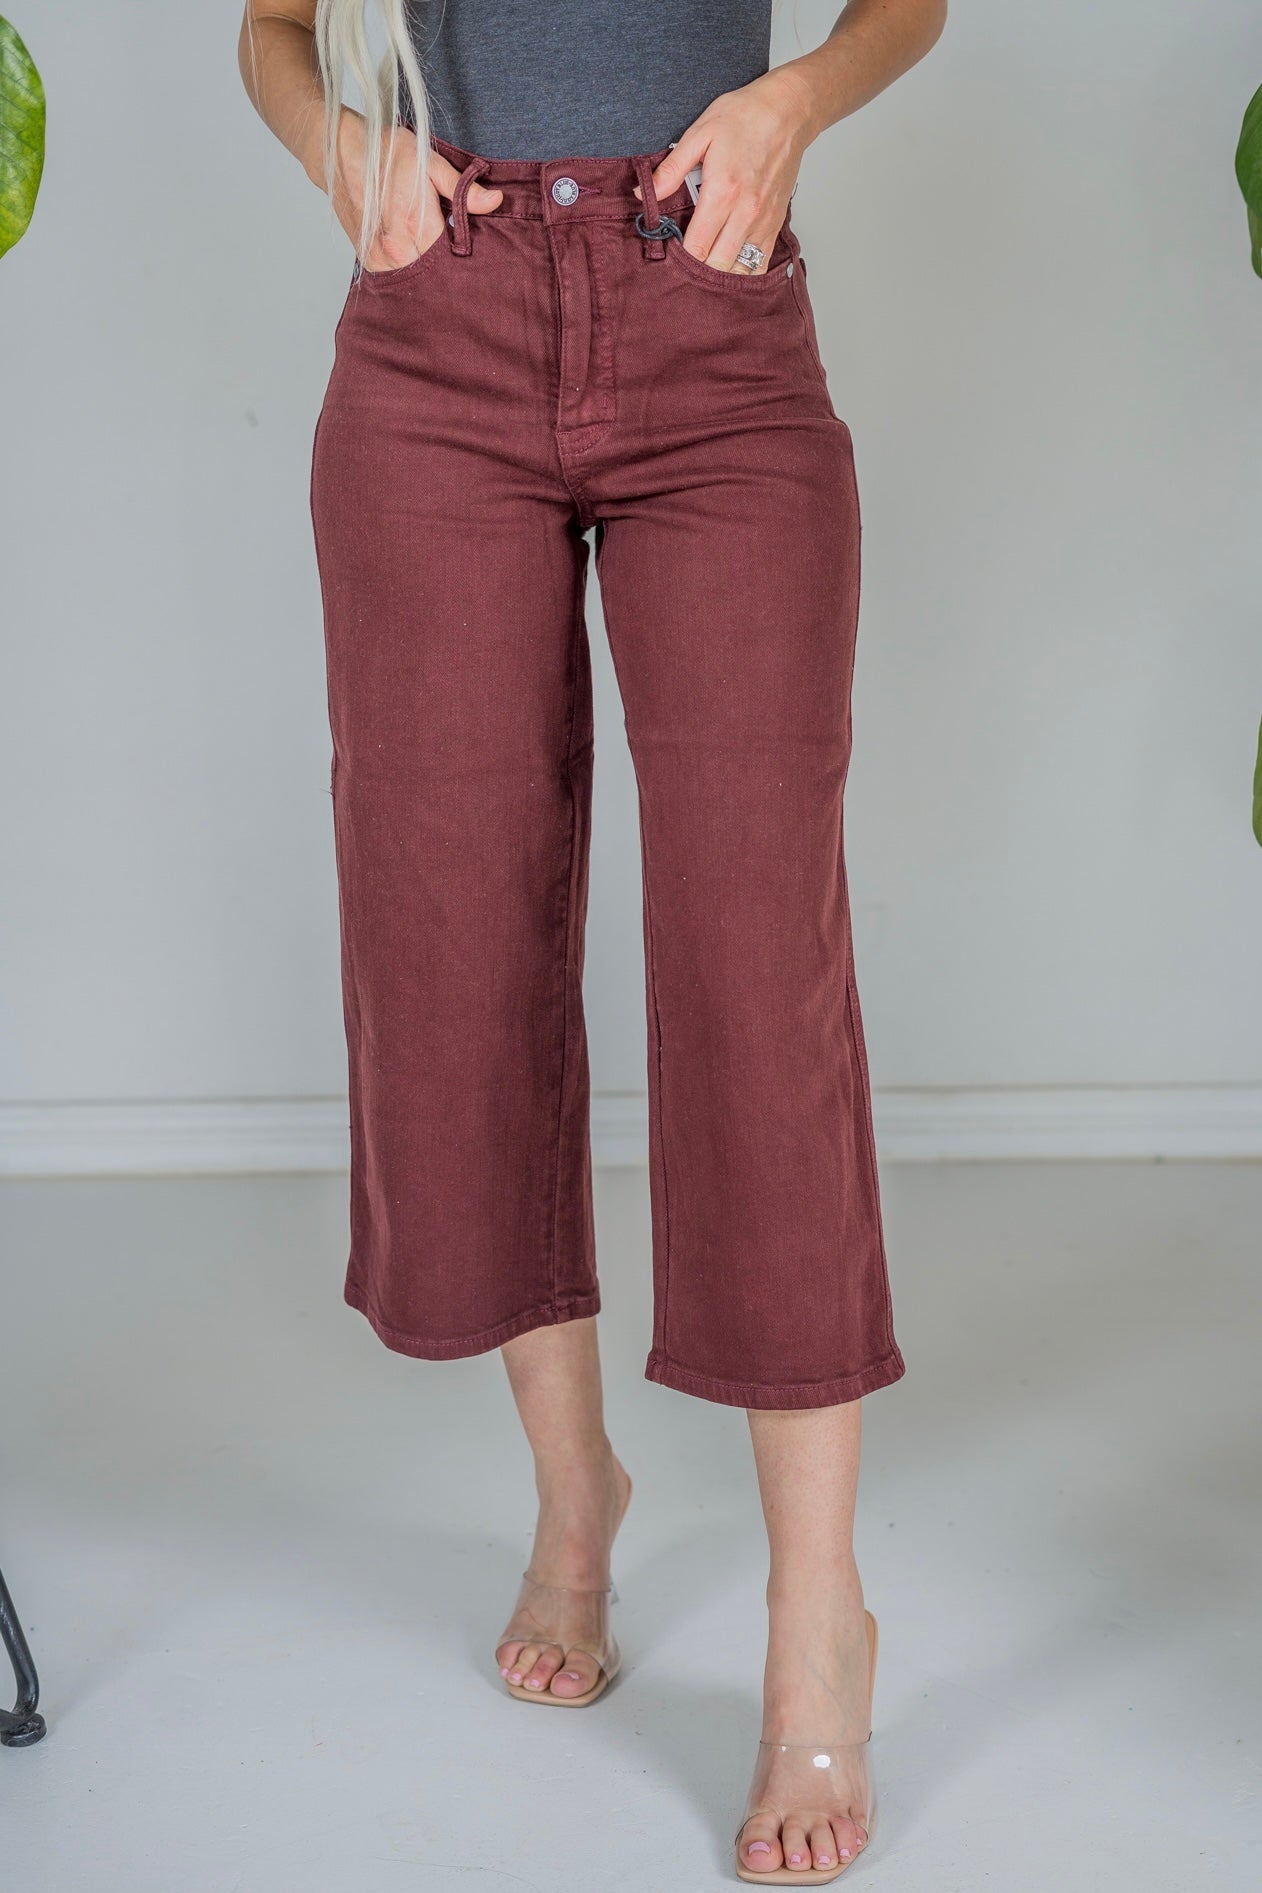 Judy Blue Tummy Control Cropped Wide Leg Jeans Oxblood - Whiskey Skies - JUDY BLUE